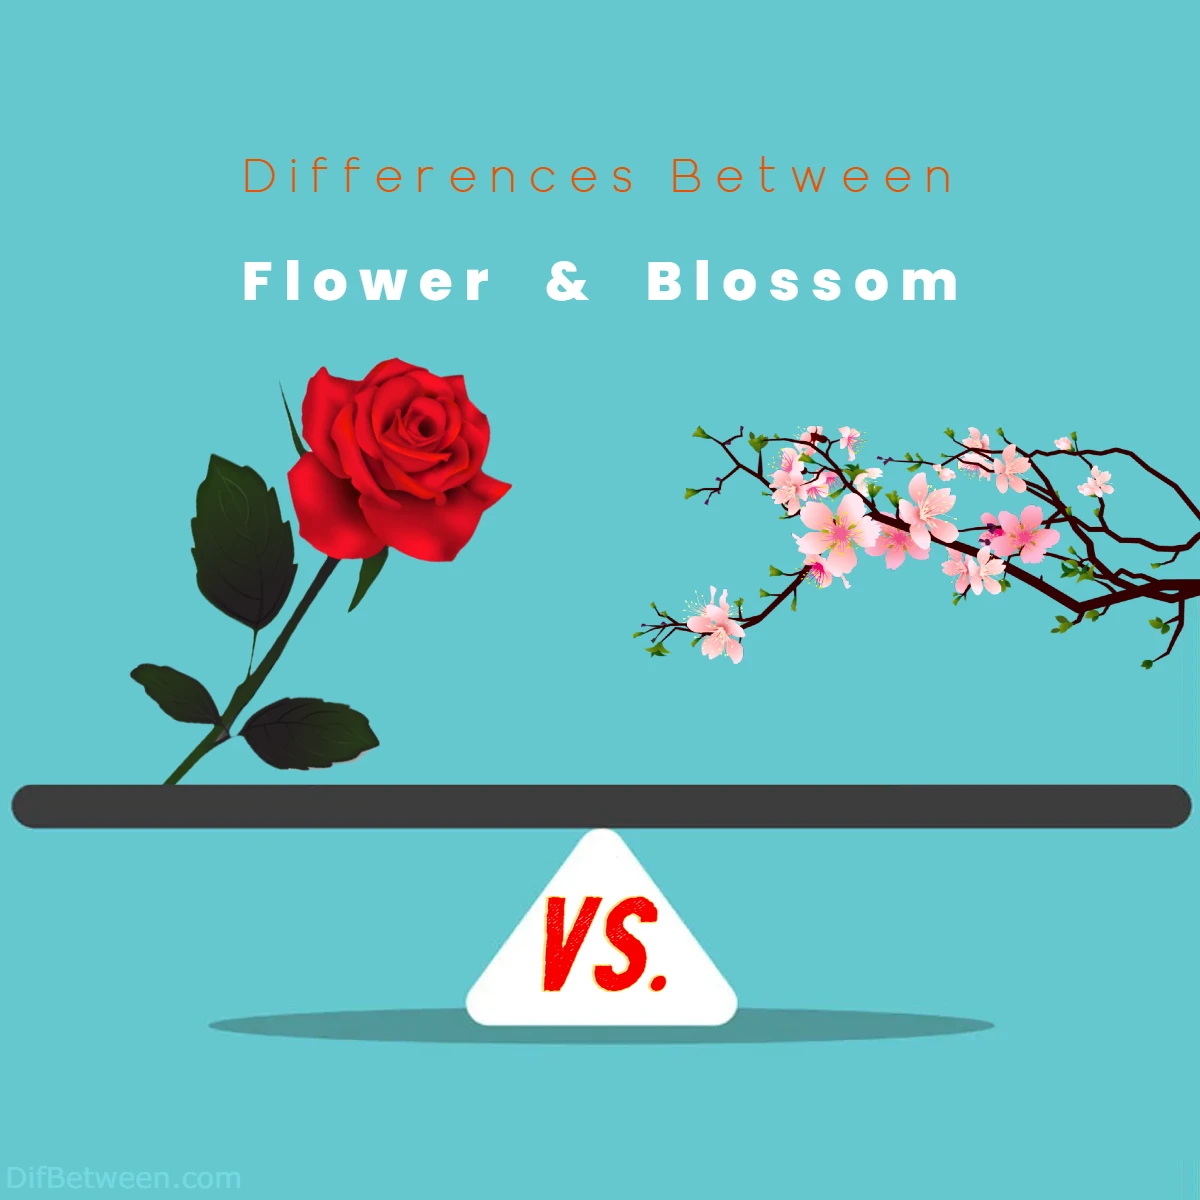 Differences Between Flower vs Blossom